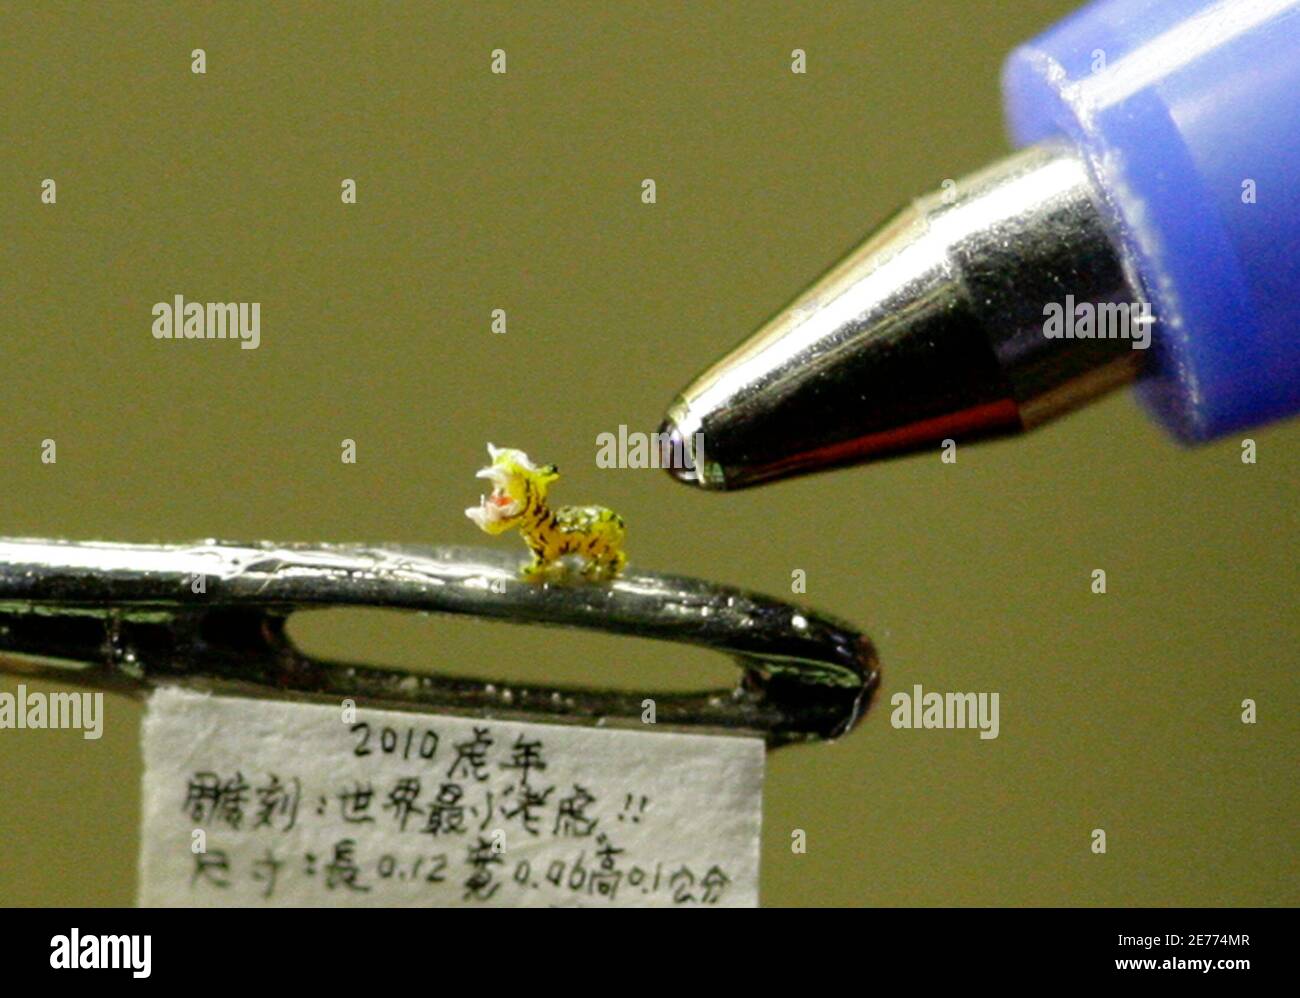 A miniature resin figurine of a tiger, which is about 0.12cm (0.05 inches) long and 0.1cm (0.04 inches) high, is displayed on a needle in Taipei January 17, 2010. Taiwanese artist Chen Forng-shean created the tiger figurine to welcome the Lunar Year of the Tiger.  REUTERS/Pichi Chuang (TAIWAN - Tags: SOCIETY IMAGES OF THE DAY) Stock Photo